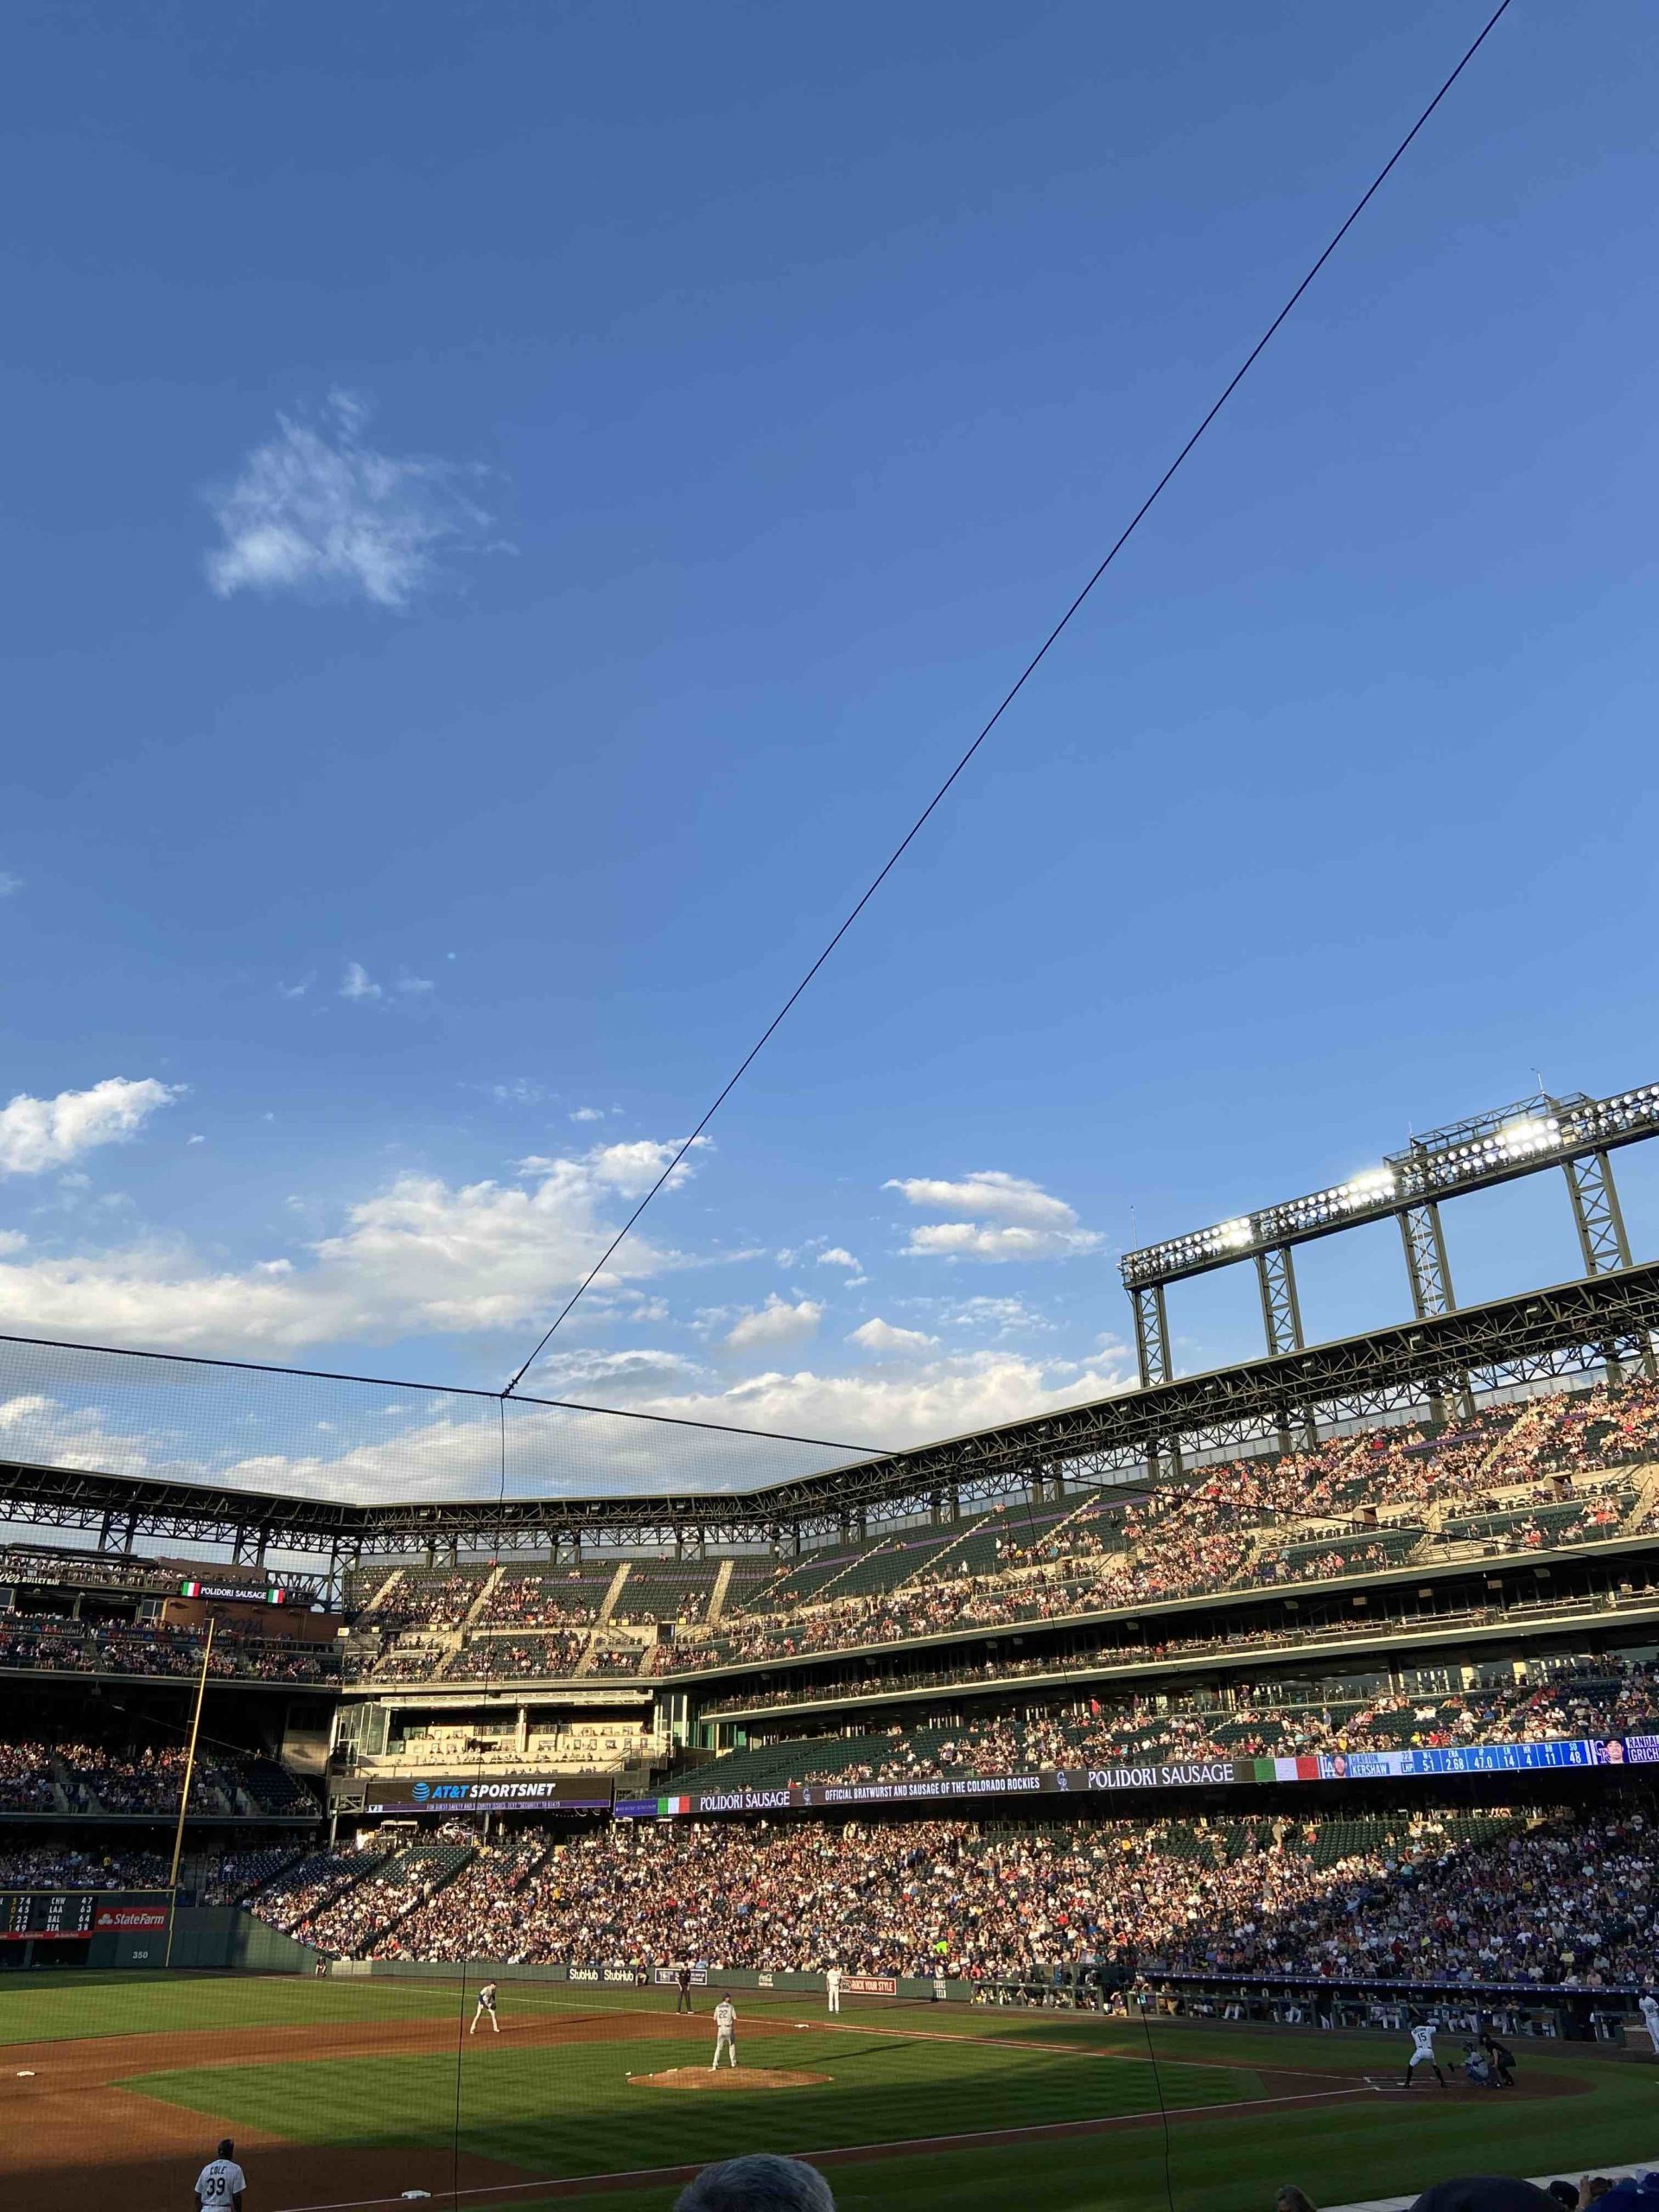 The view of the baseball field at Coors Field